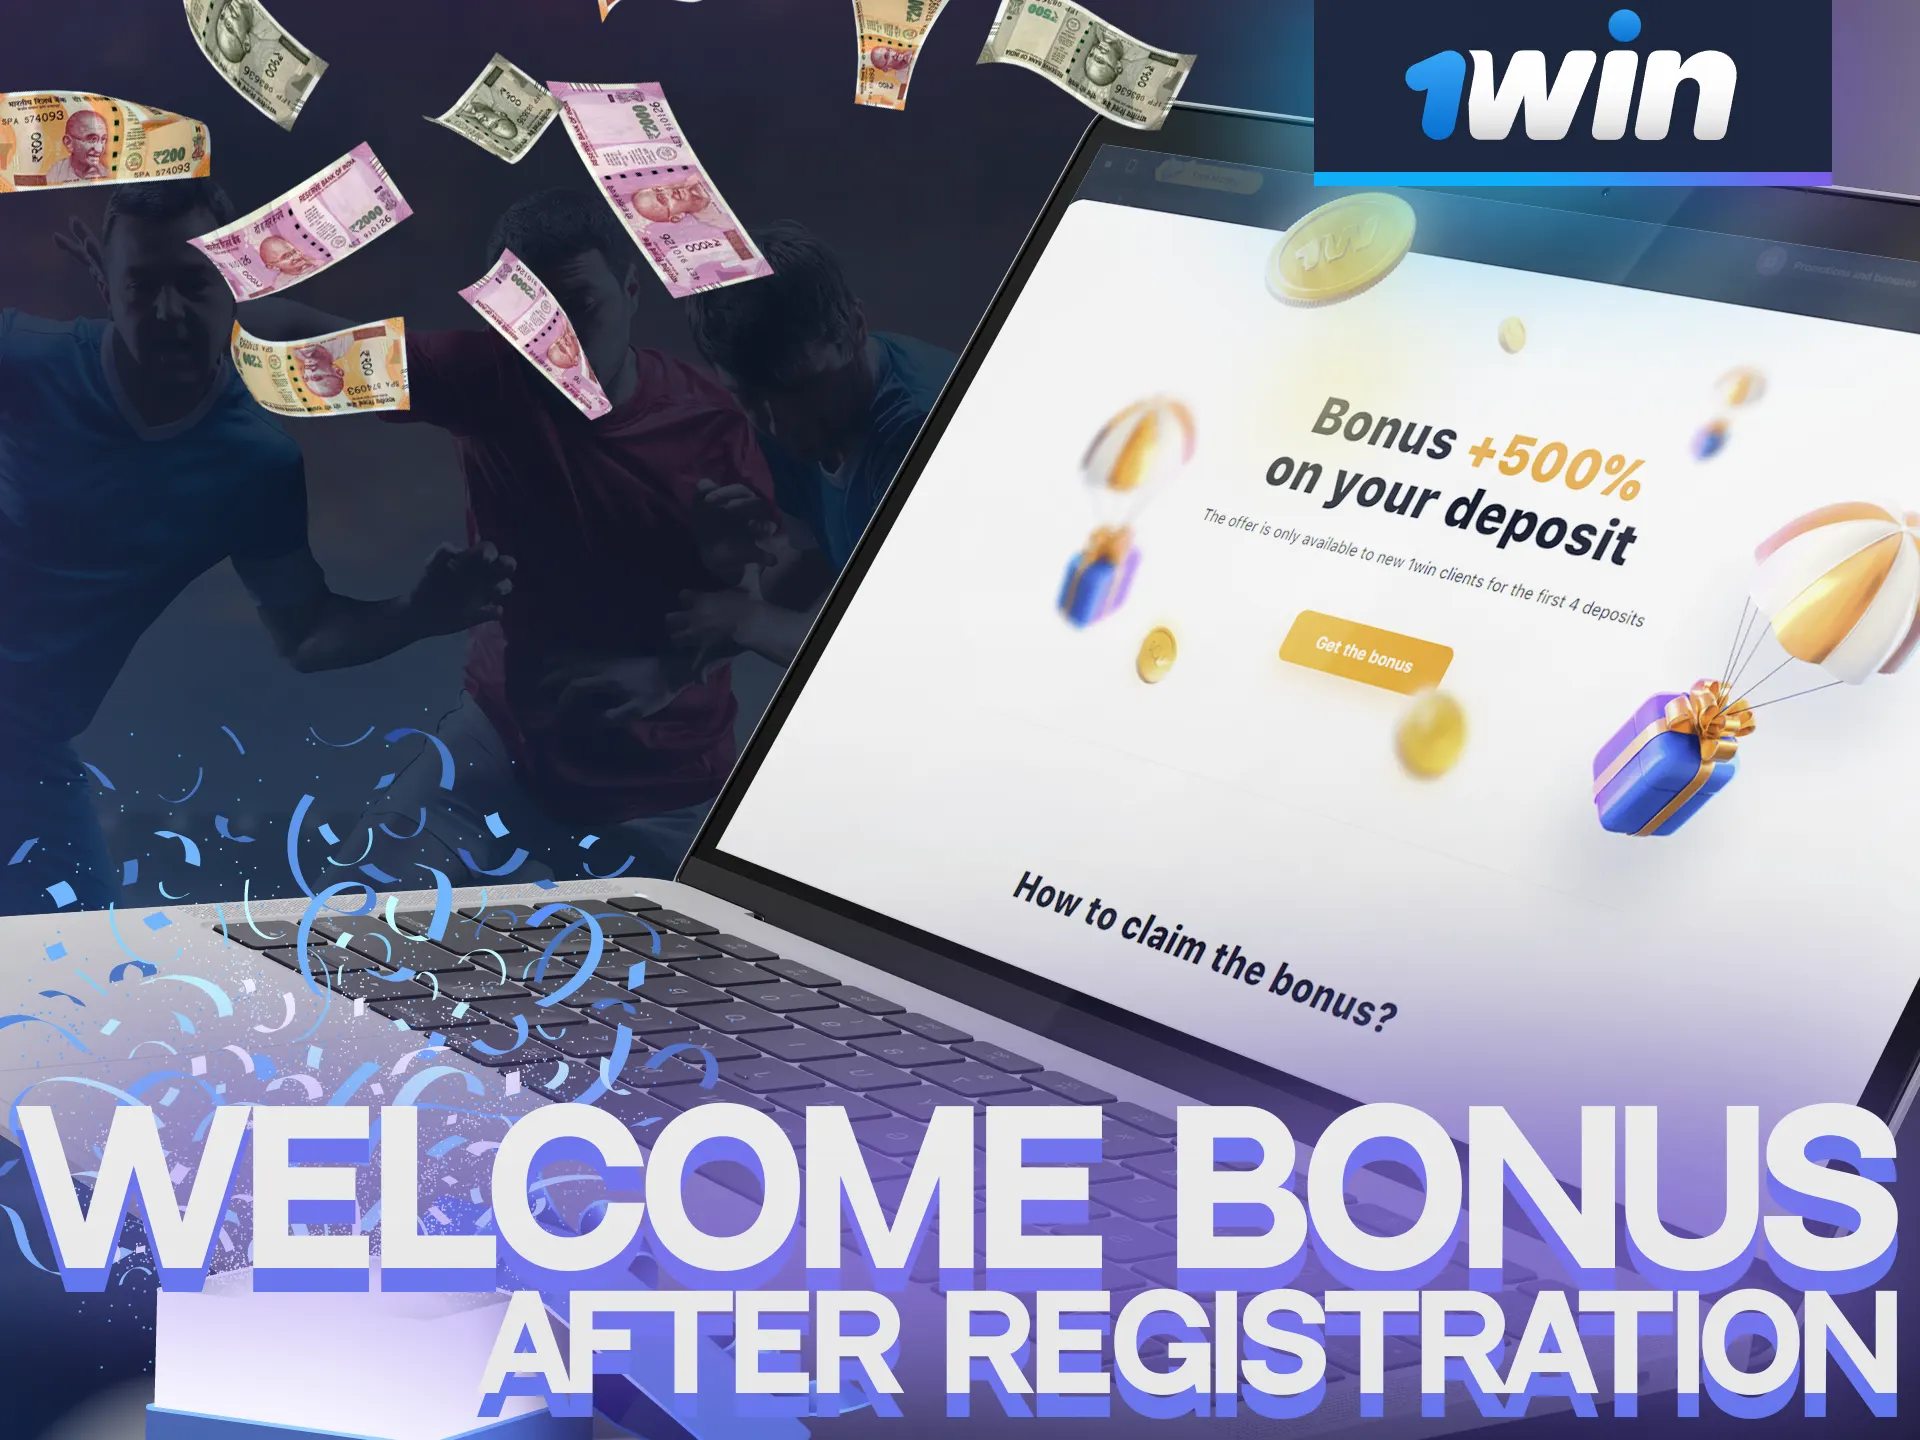 Get a special welcome bonus from 1Win after registering.